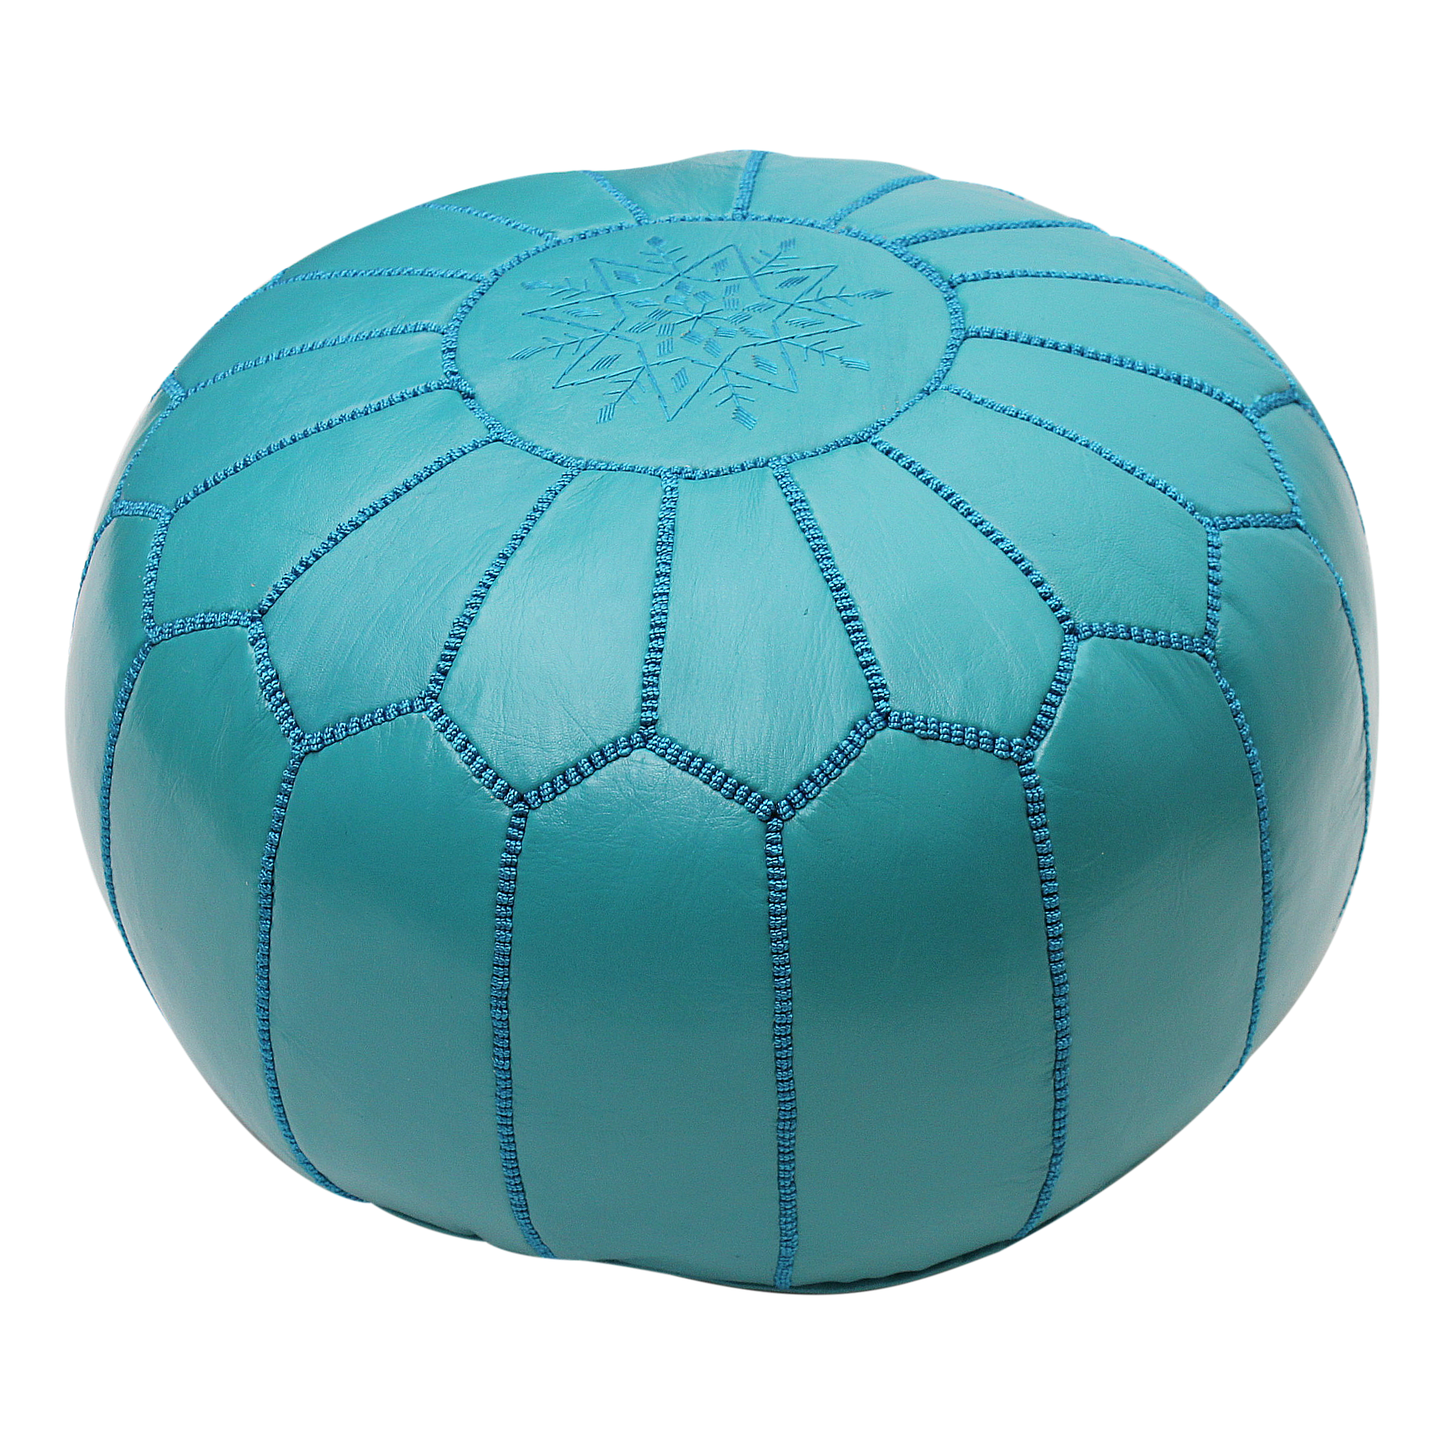 Moroccan Pouffe Pouf Ottoman Footstool COVER ONLY or STUFFED Real Turquoise Blue Leather